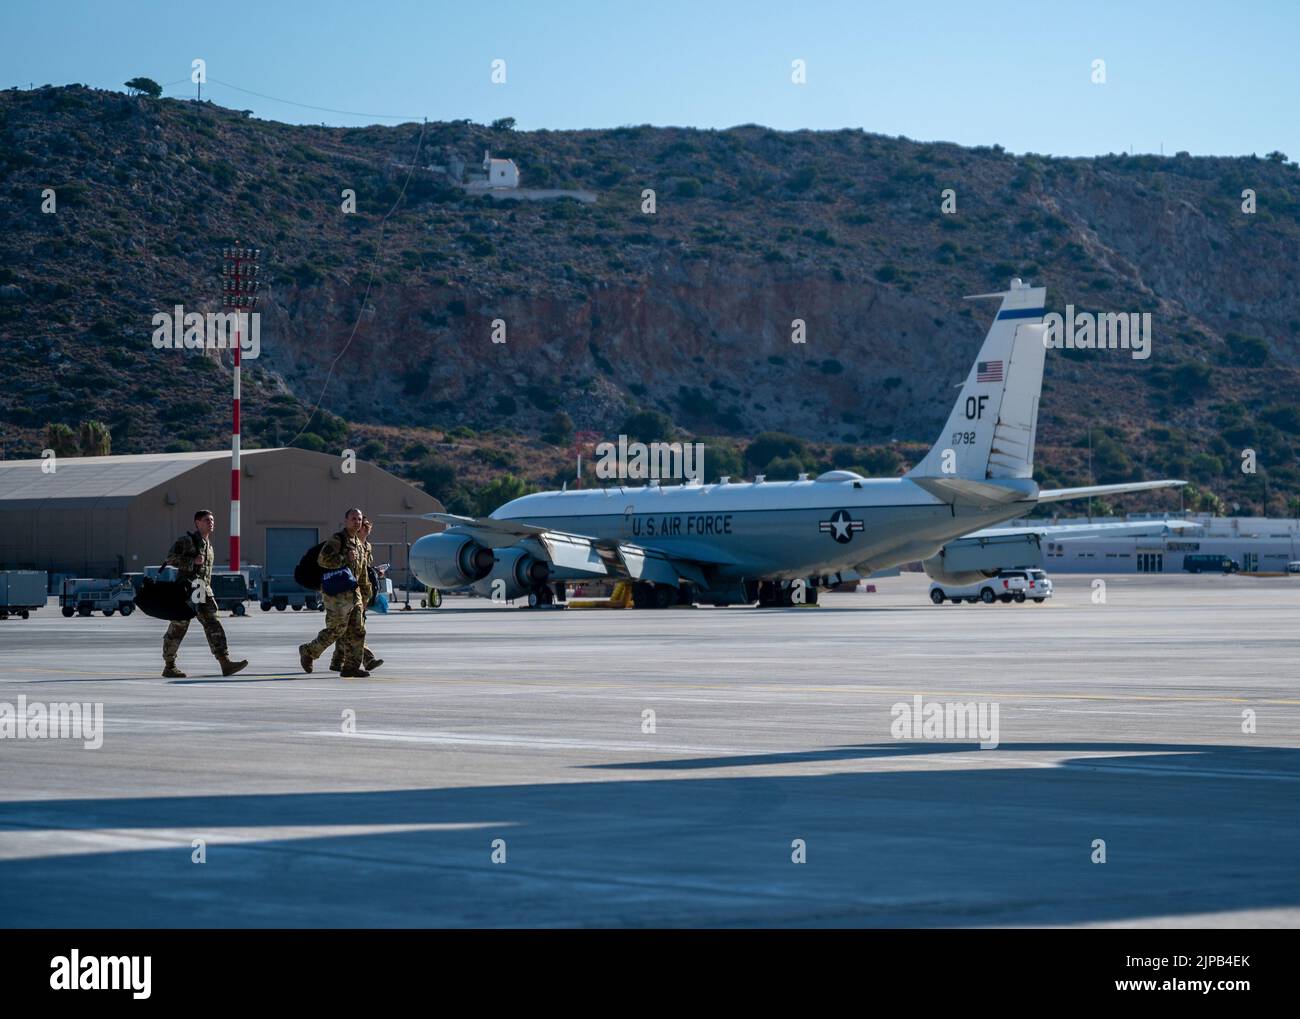 A U.S. Air Force RC-135W Rivet Joint aircraft assigned to the 763rd Expeditionary Reconnaissance Squadron is parked at Souda Bay, Greece, during a rapid deployment training exercise Aug.12, 2022. The cross-combatant exercise is taking place less than a year after the Rivet Joint executed its first ACE exercise stateside in 2021. The RC-135W is the latest aircraft in the CENTCOM profile to practice ACE concepts, enabling the command to refine and further perfect tactics, techniques and procedures across the fleet. (U.S. Air Force photo by Staff Sgt. Charles T. Fultz) Stock Photo